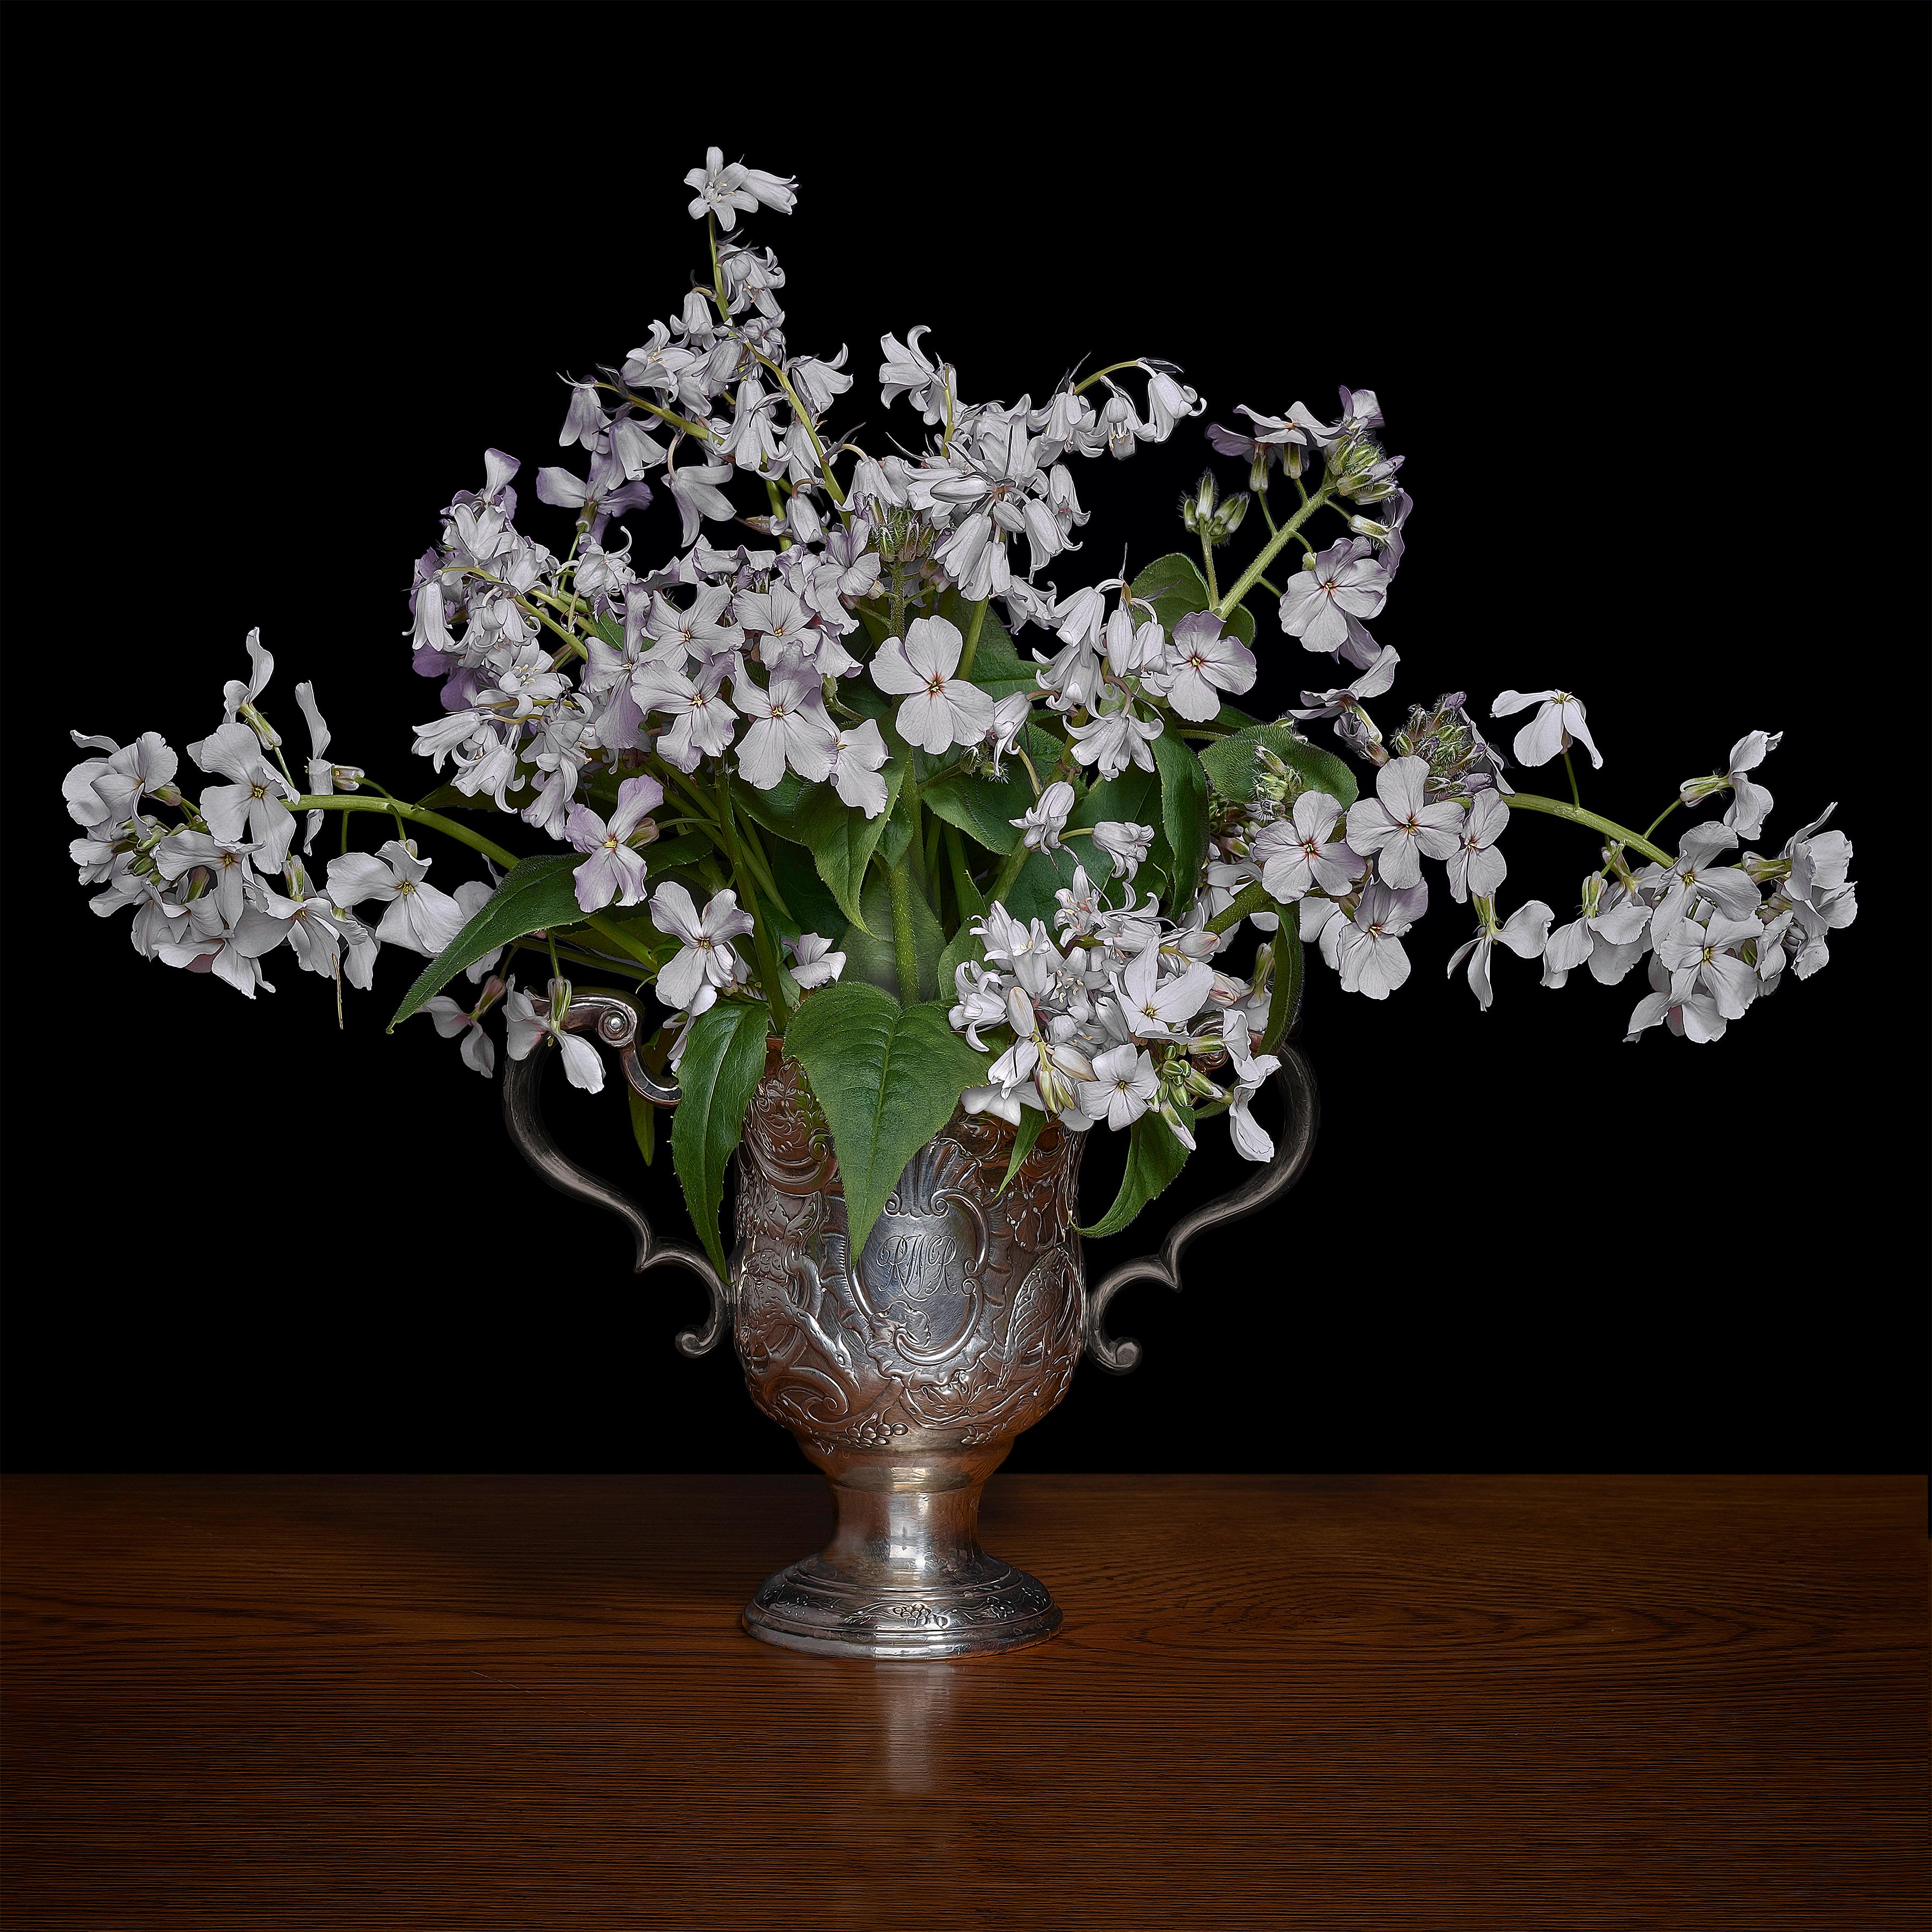 T.M. Glass Color Photograph - Woodland Scilla and Phlox in a Silver Cup